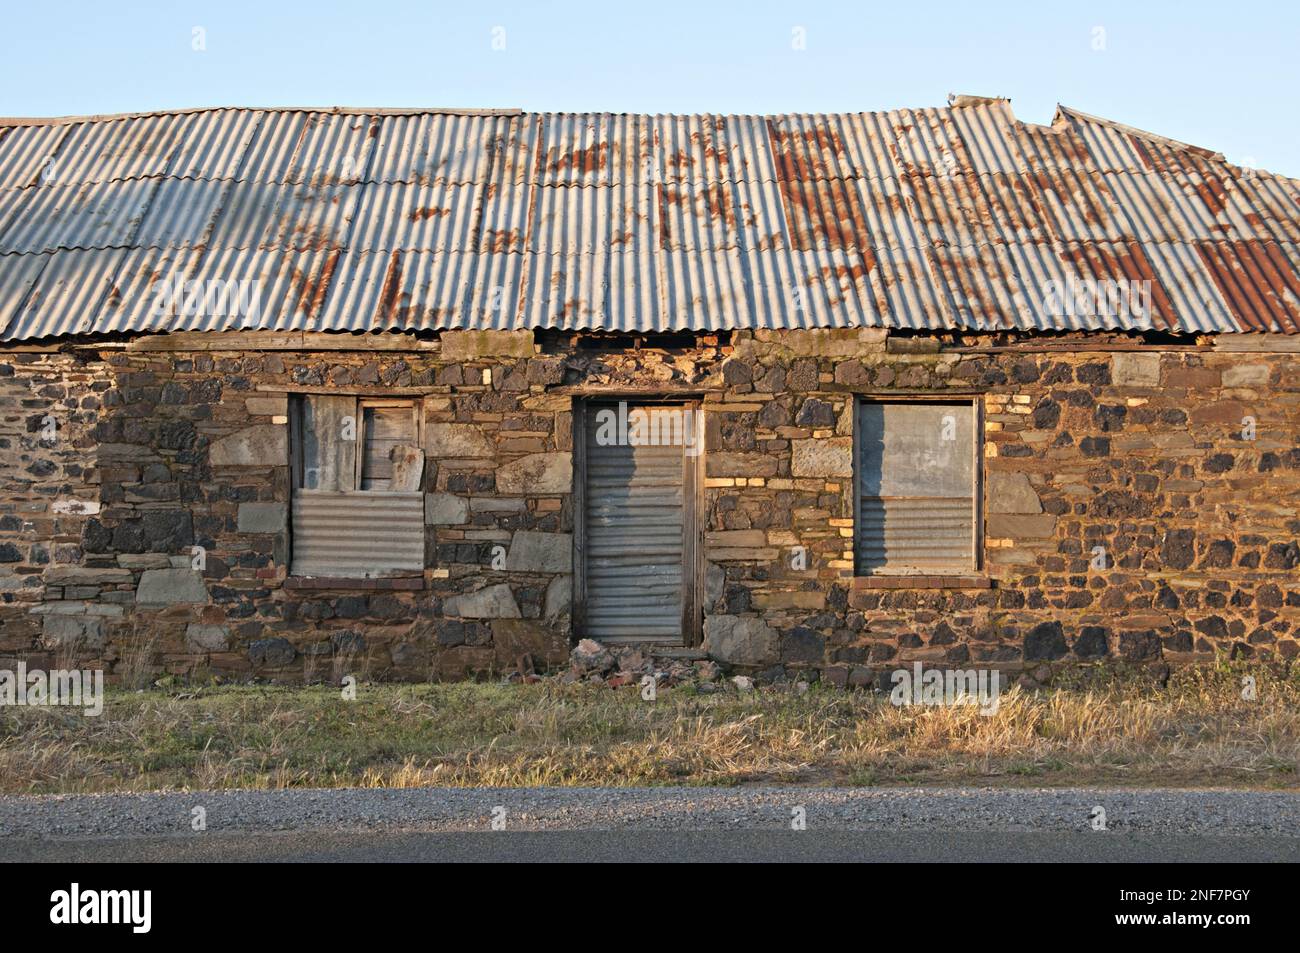 Disused 19th century stone farm building in the historic mining town of Burra, South Australia Stock Photo